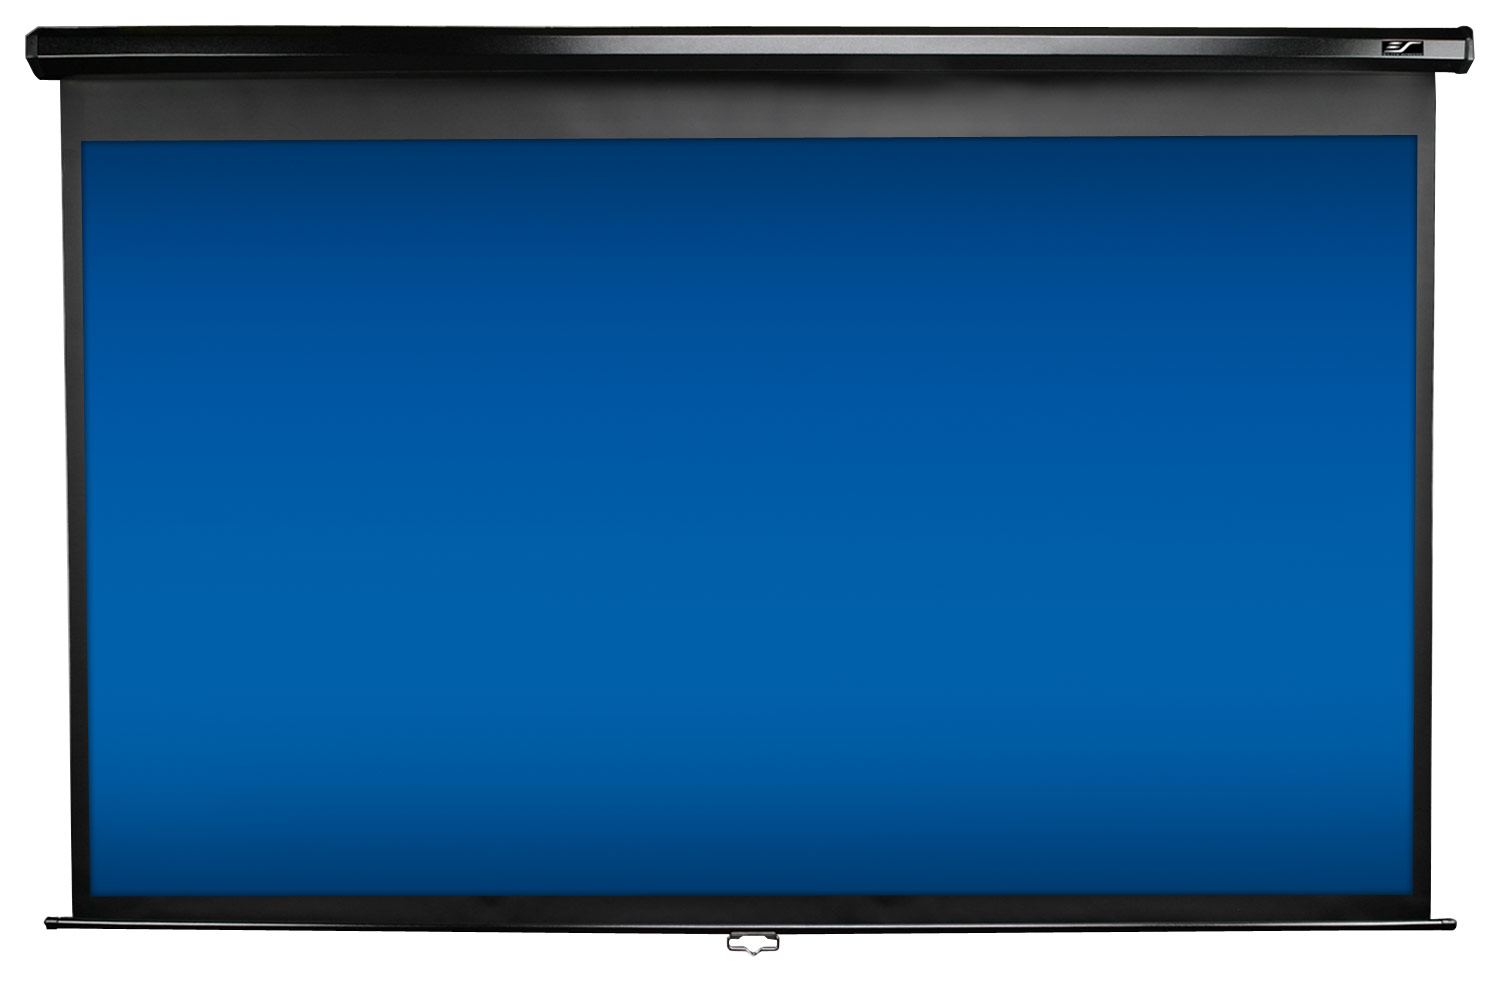 Elite Screens - Pull-Down Projector Screen - Black was $199.0 now $148.99 (25.0% off)